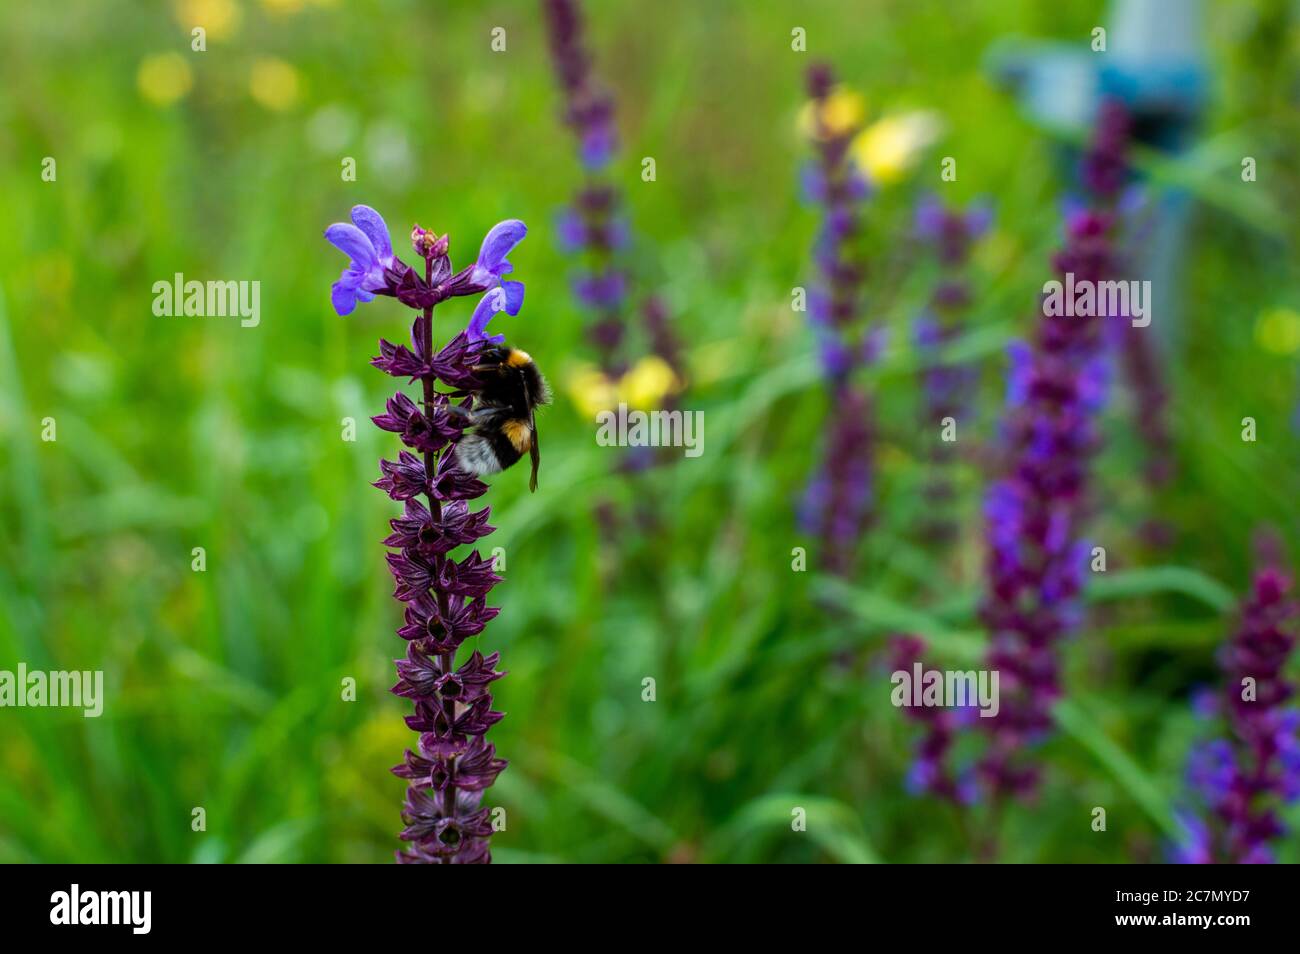 Close-up of a buff-tailed bumblebee feeding on the purple flowers of a meadow sage plant. Stock Photo